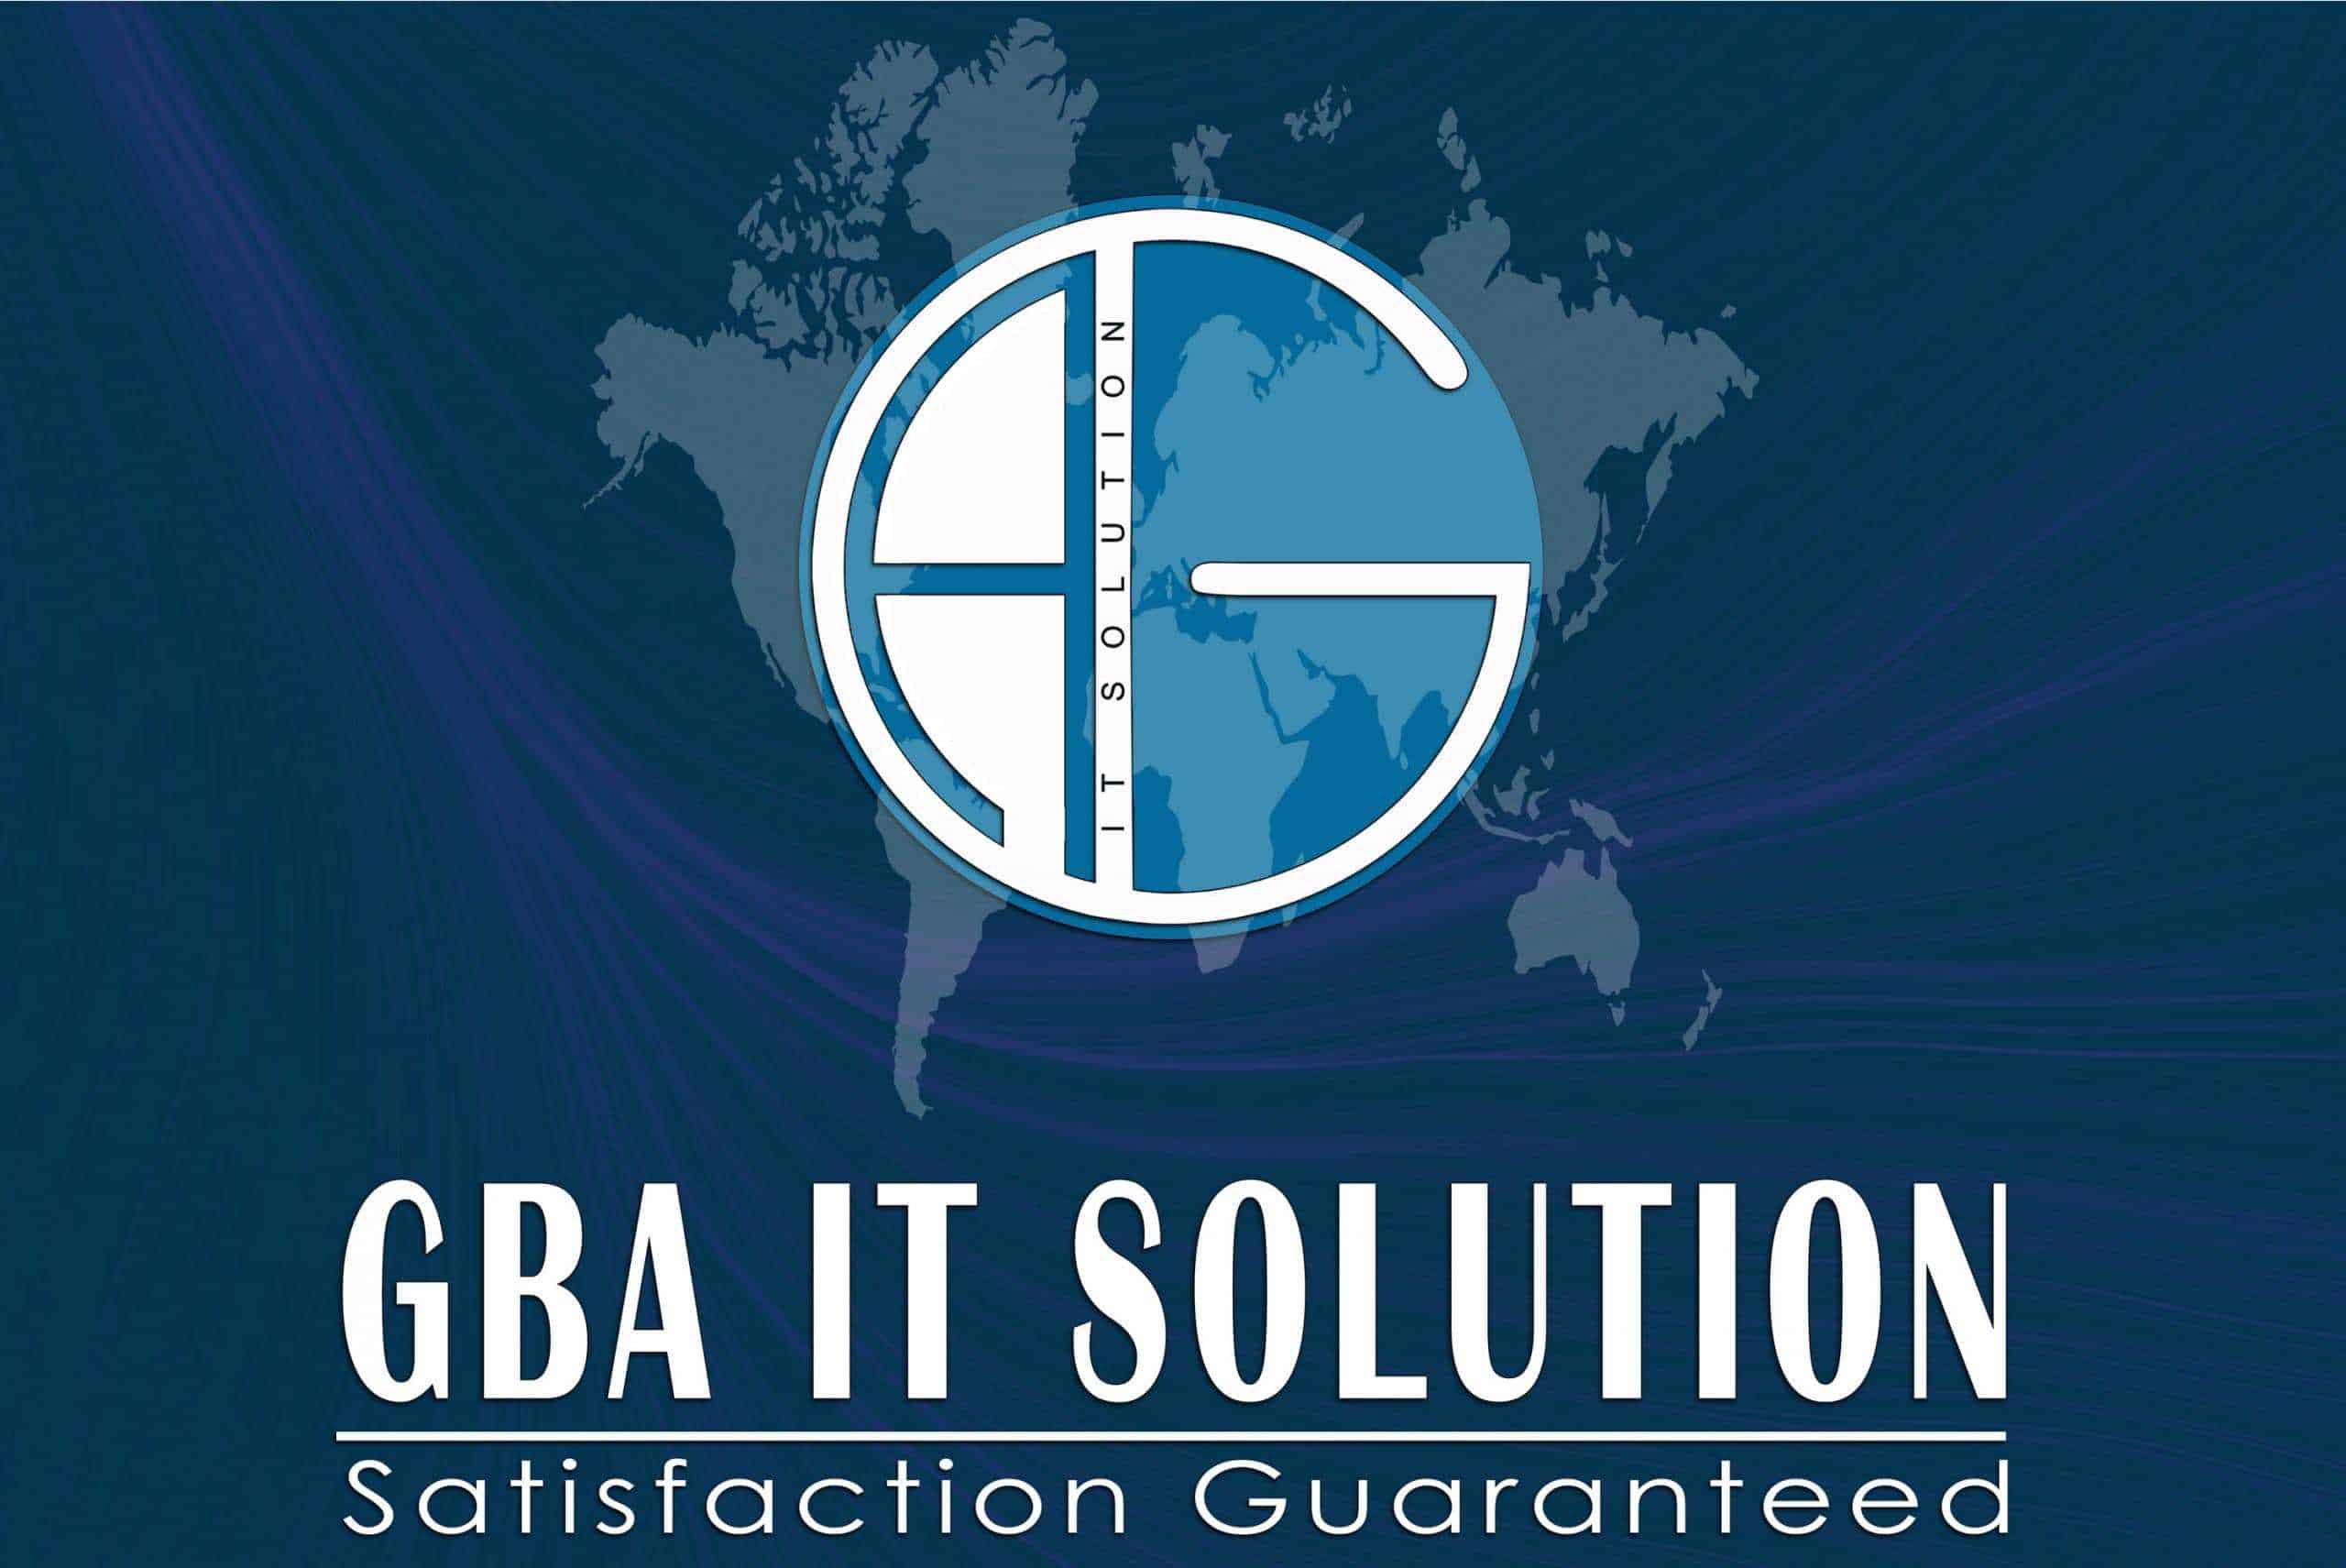 GBA IT SOLUTION Welcome